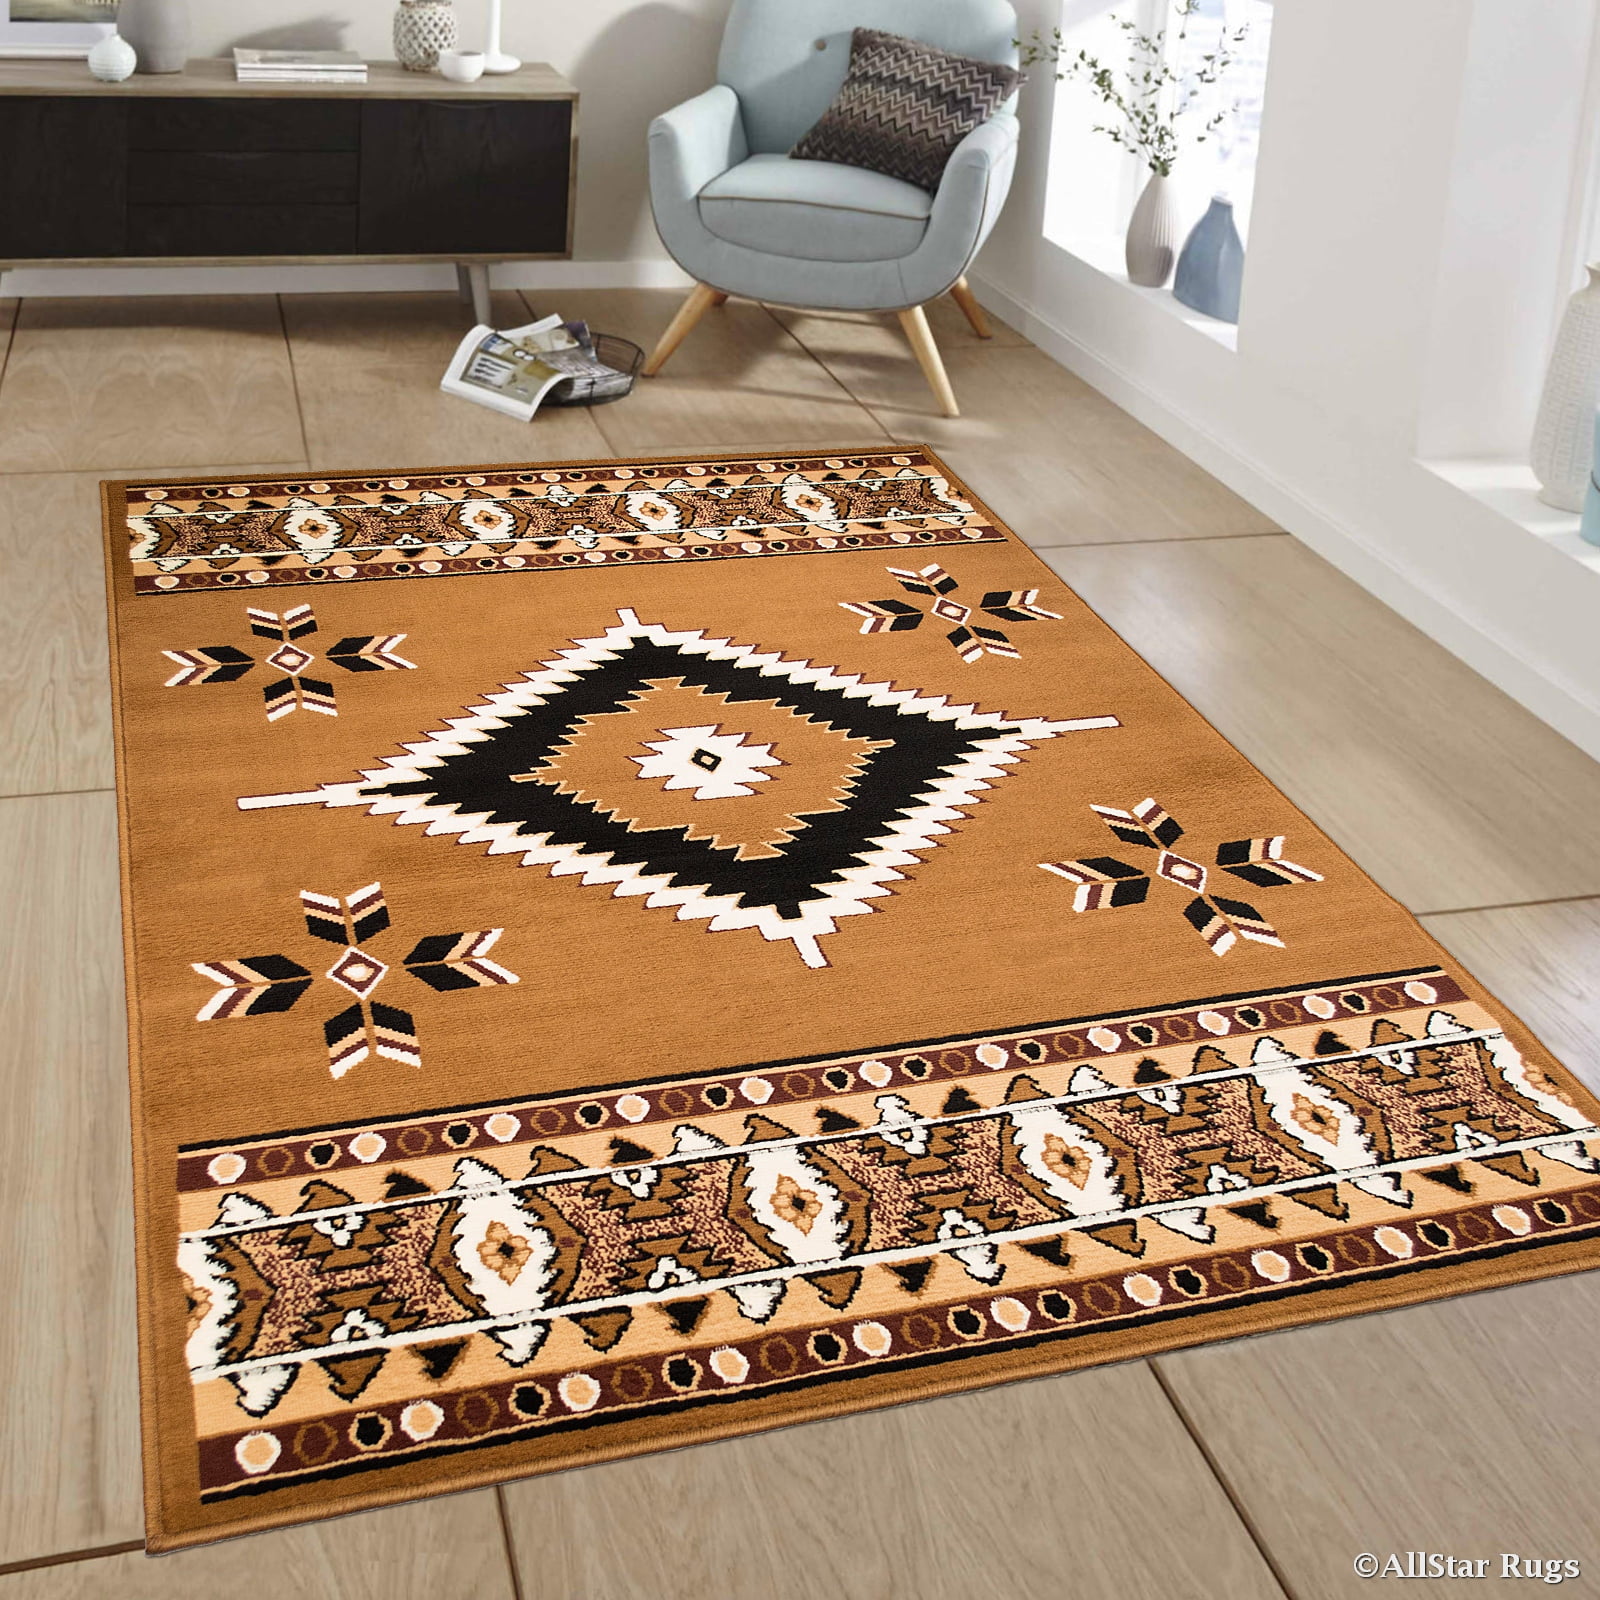 Western Rugs For Sale